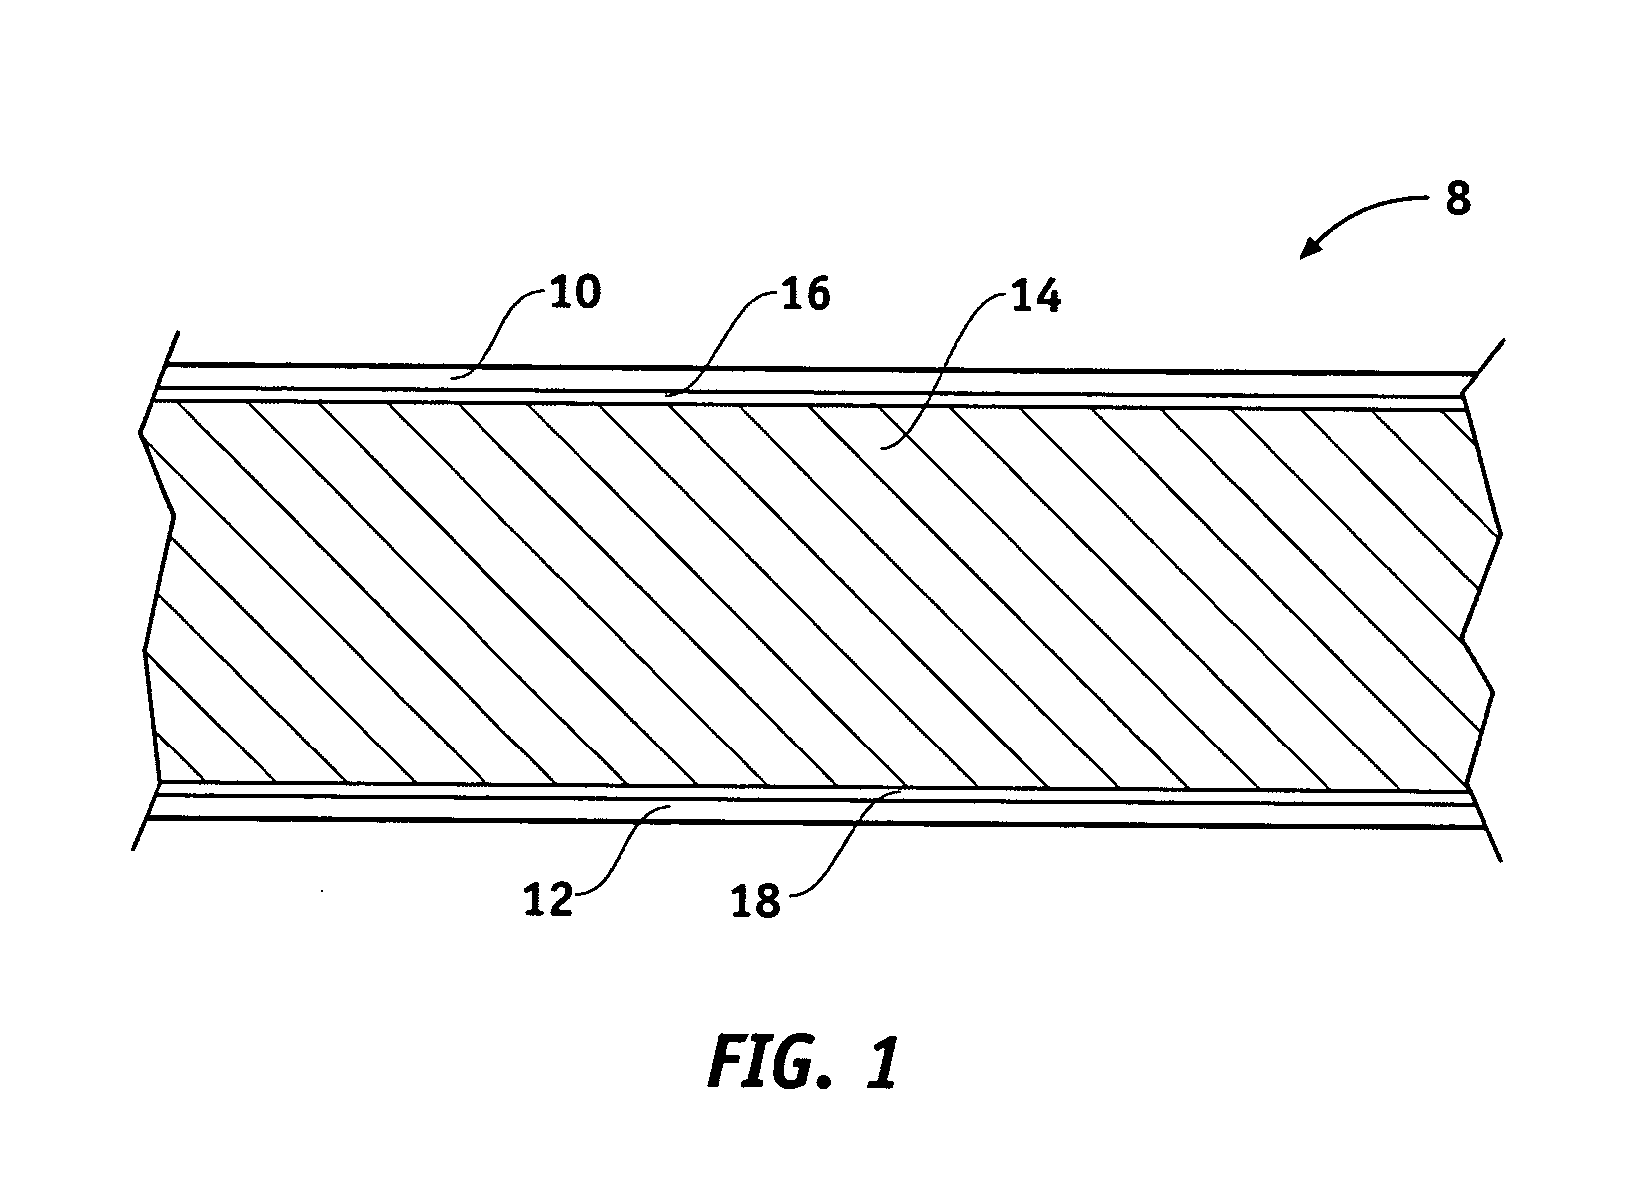 Acoustically damped composite construction for the forward portion of a rocket or missile